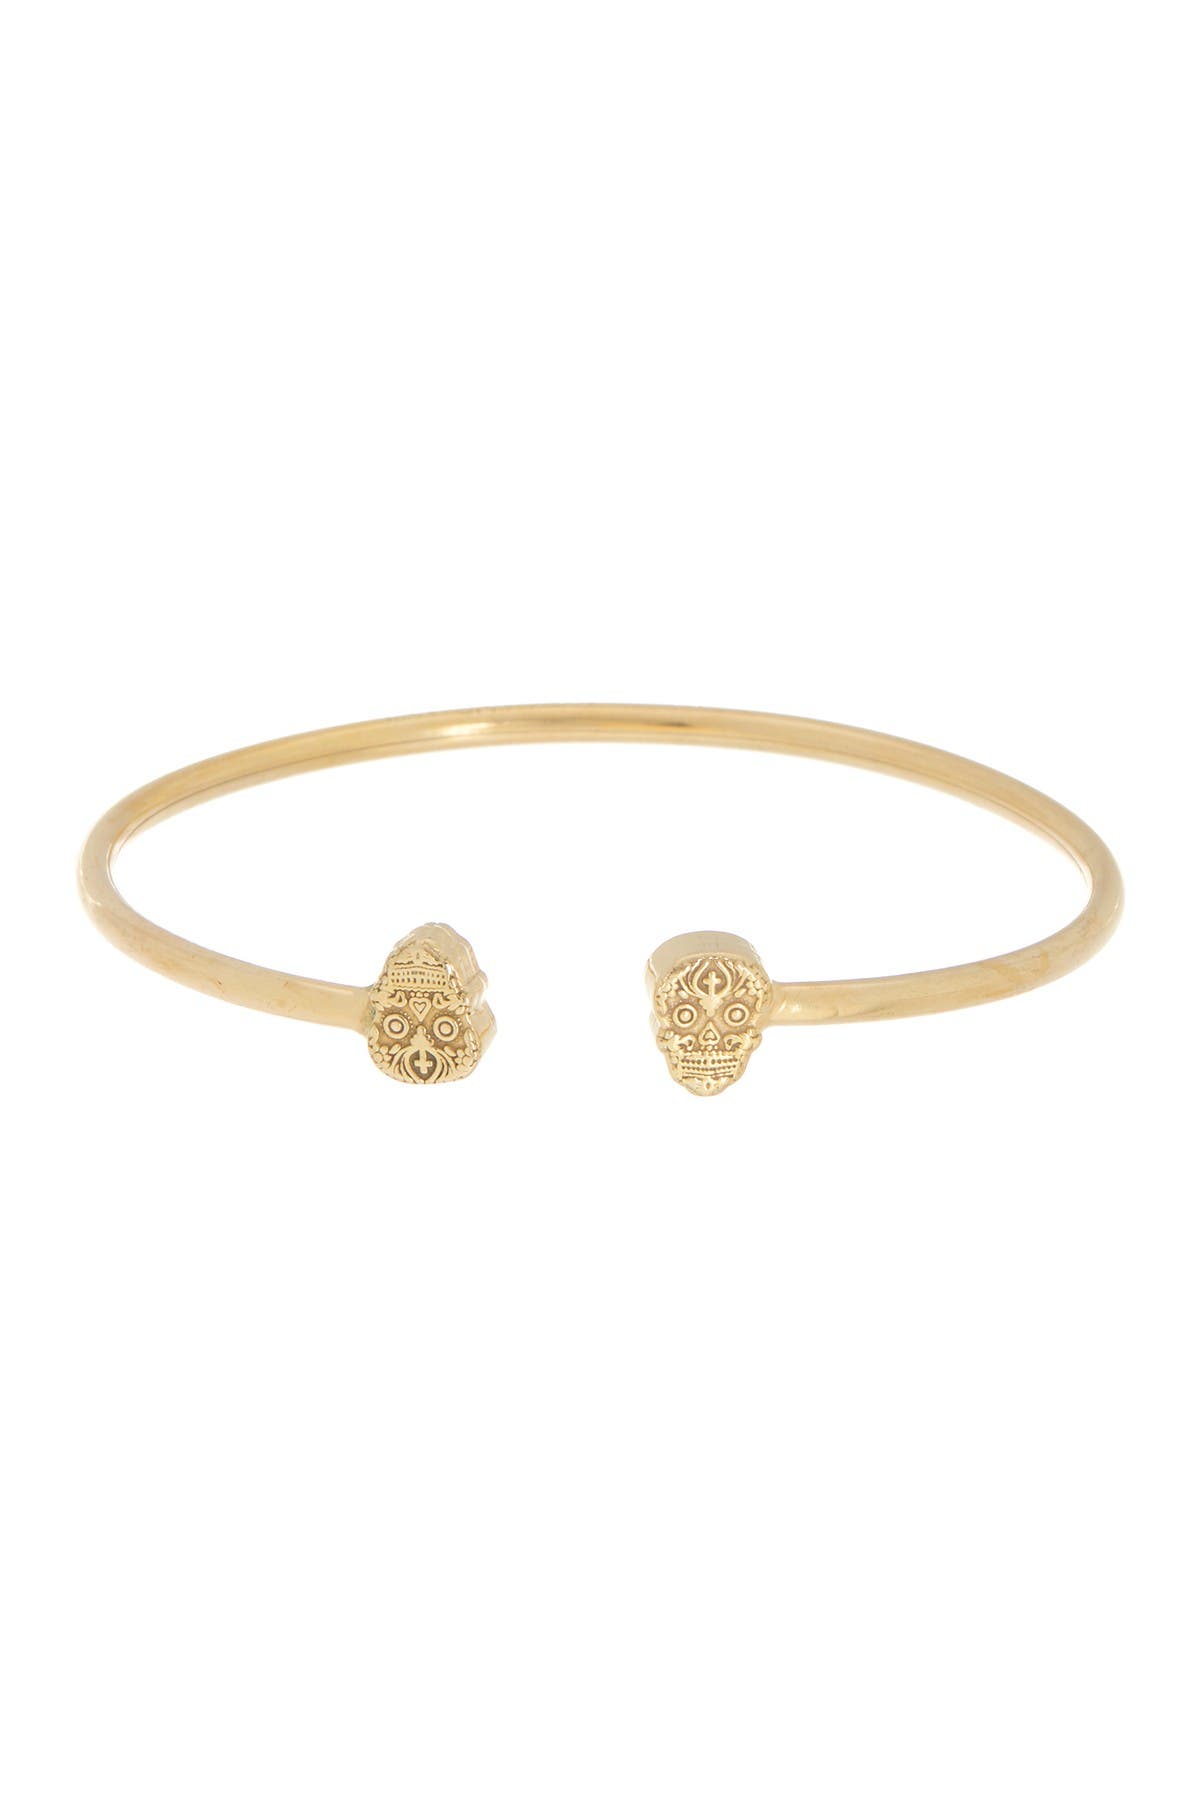 Alex And Ani 14kt Gold Plated Sterling Silver Calavera Cuff Bracelet